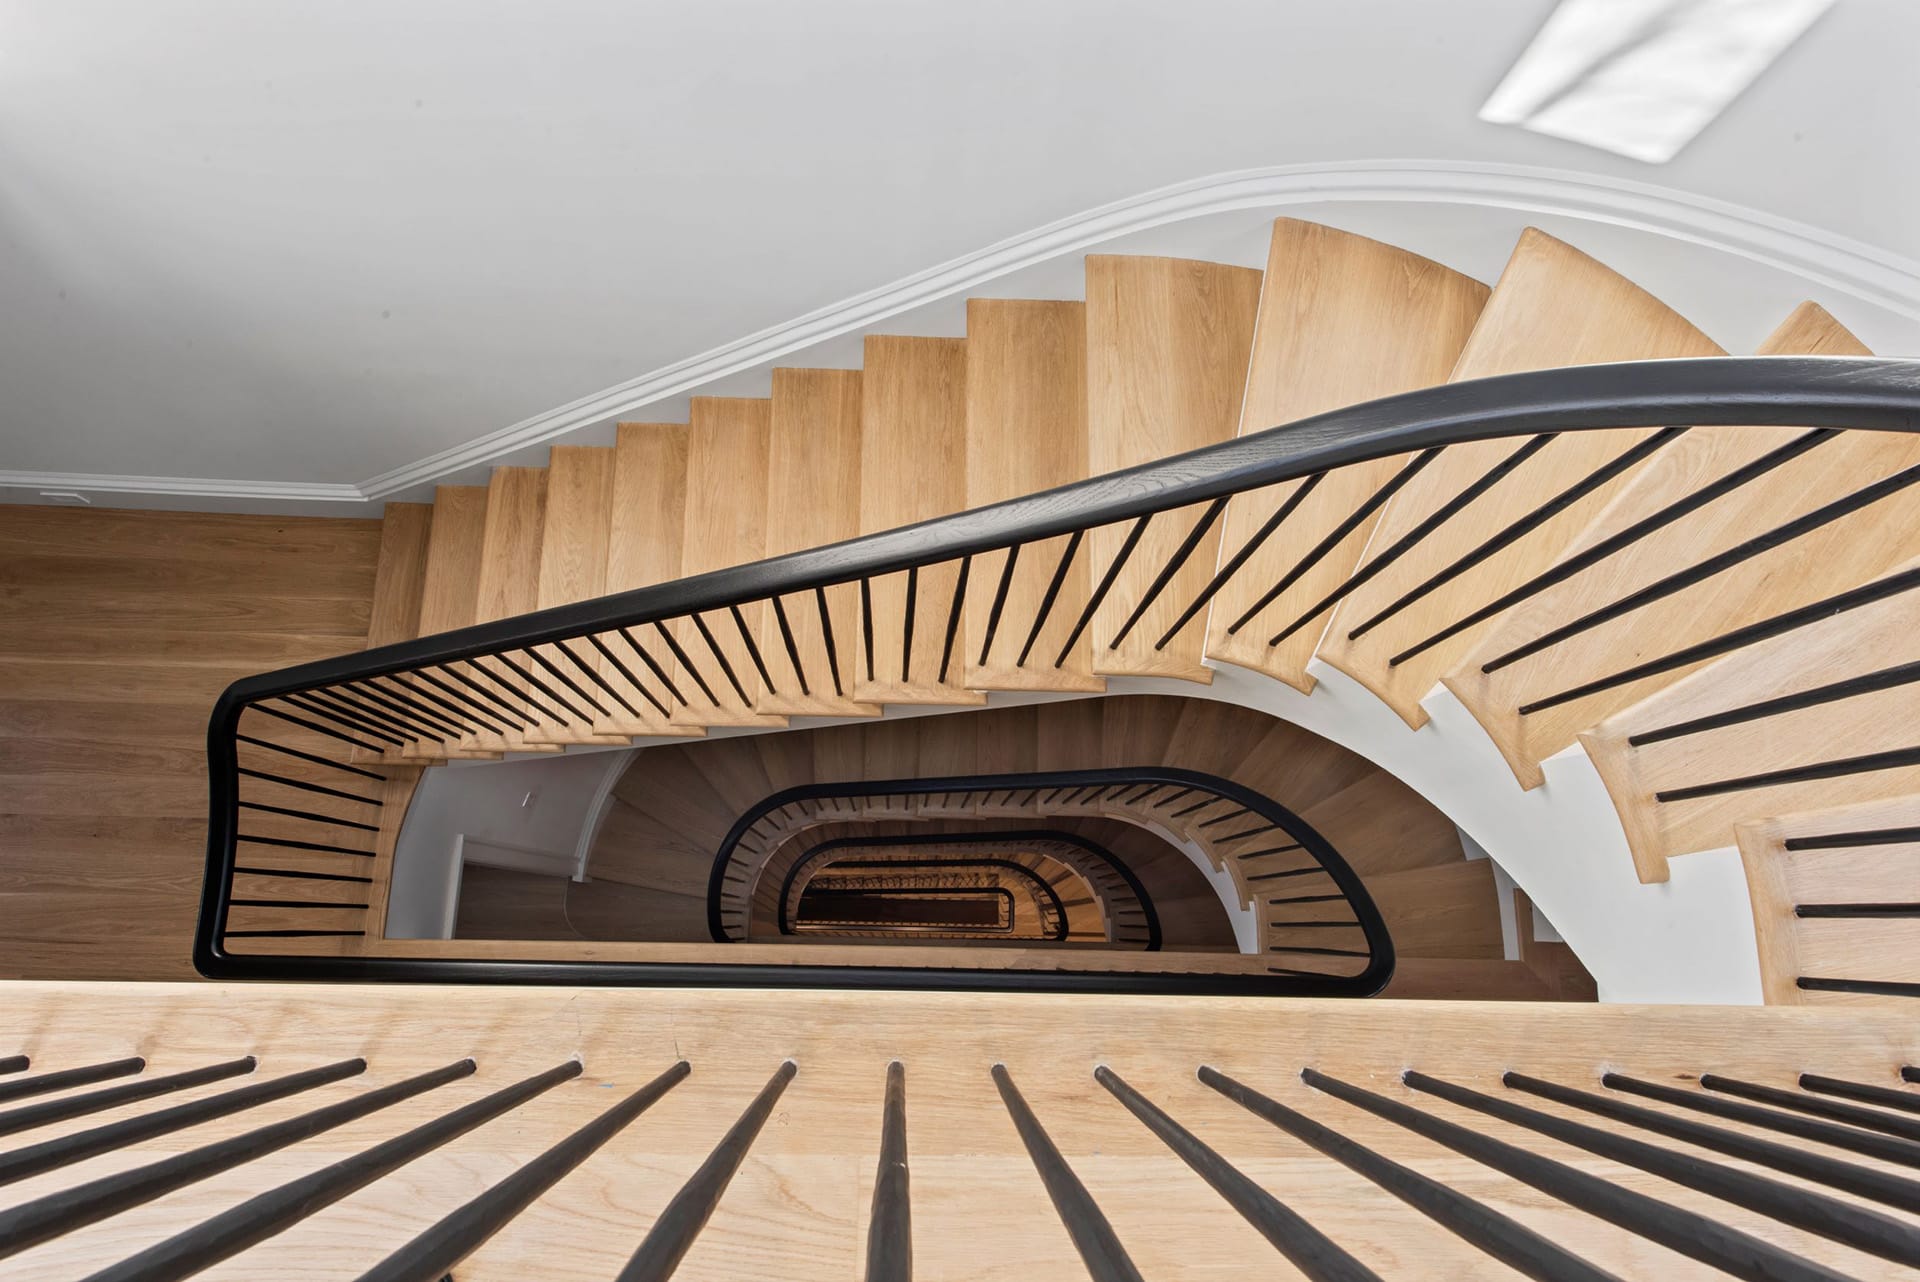 View looking down an open staircase from the fifth floor of a townhouse. The staircase has white oak risers and black handrail